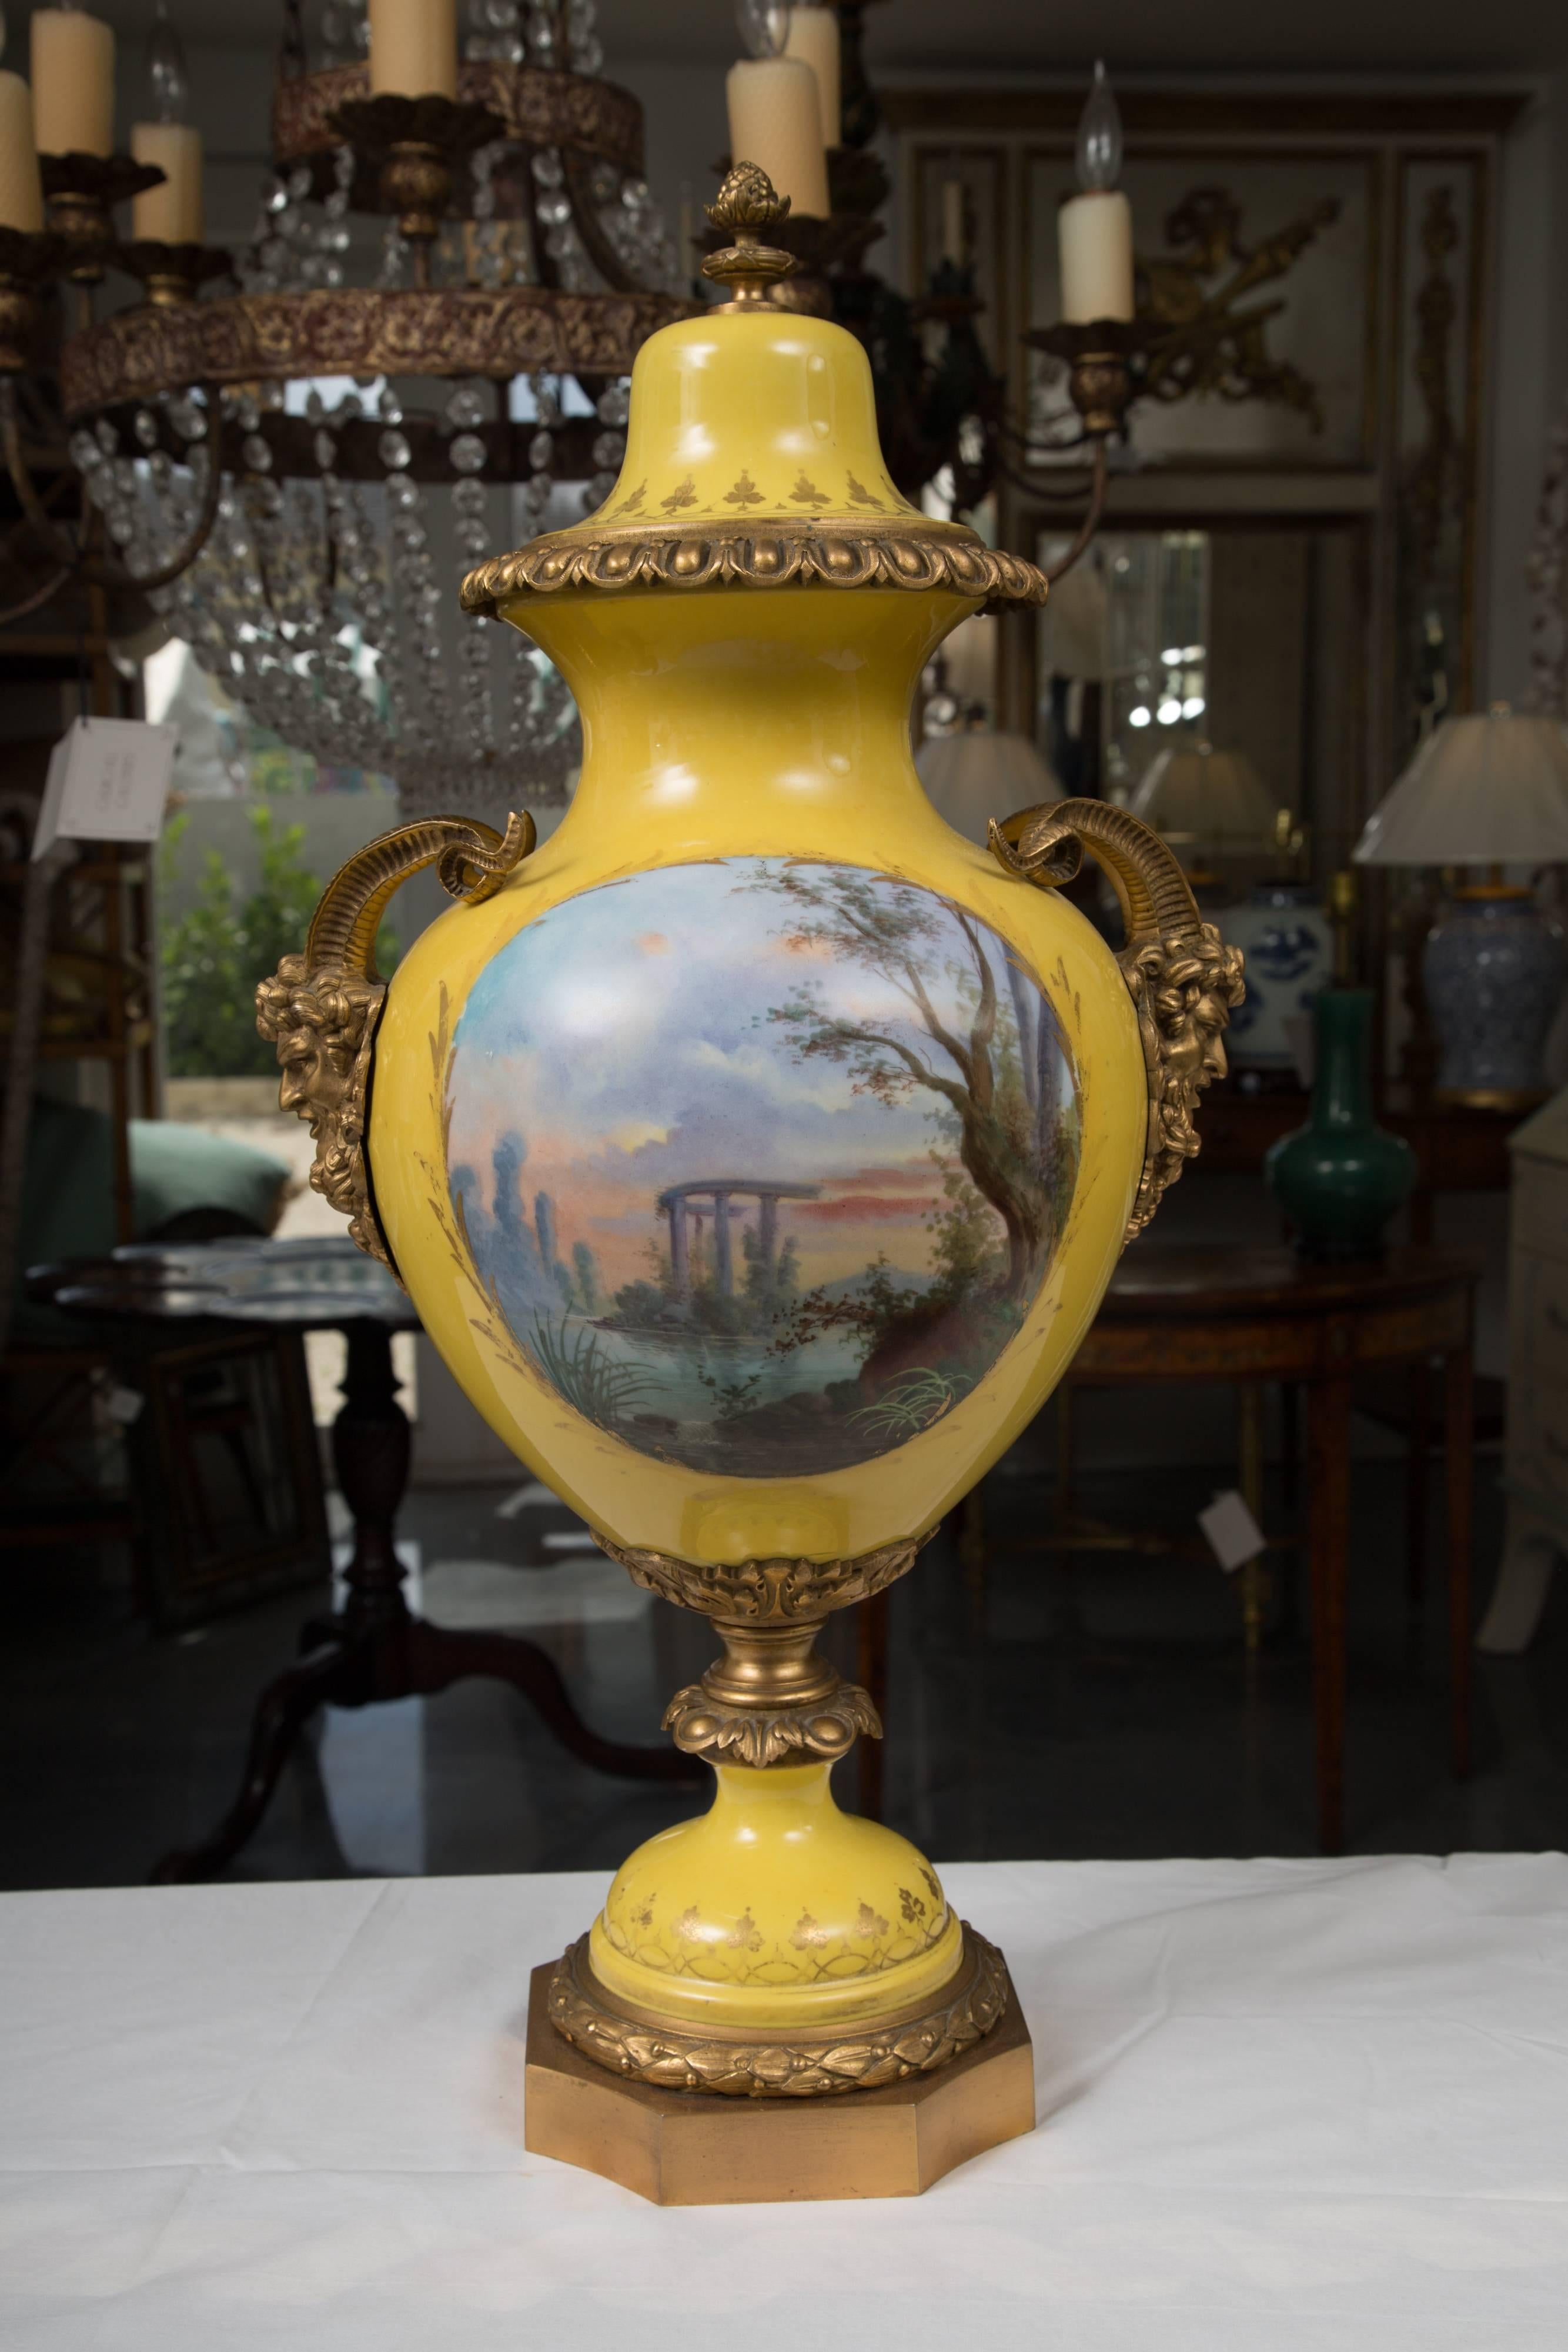 This soft yellow hand-painted porcelain large-scale urn depicts lovers with cherubs in background. The reverse side shows a classic naturalistic setting. The body of the urn is decorated with impressive rams heads. There is a removable lid and the